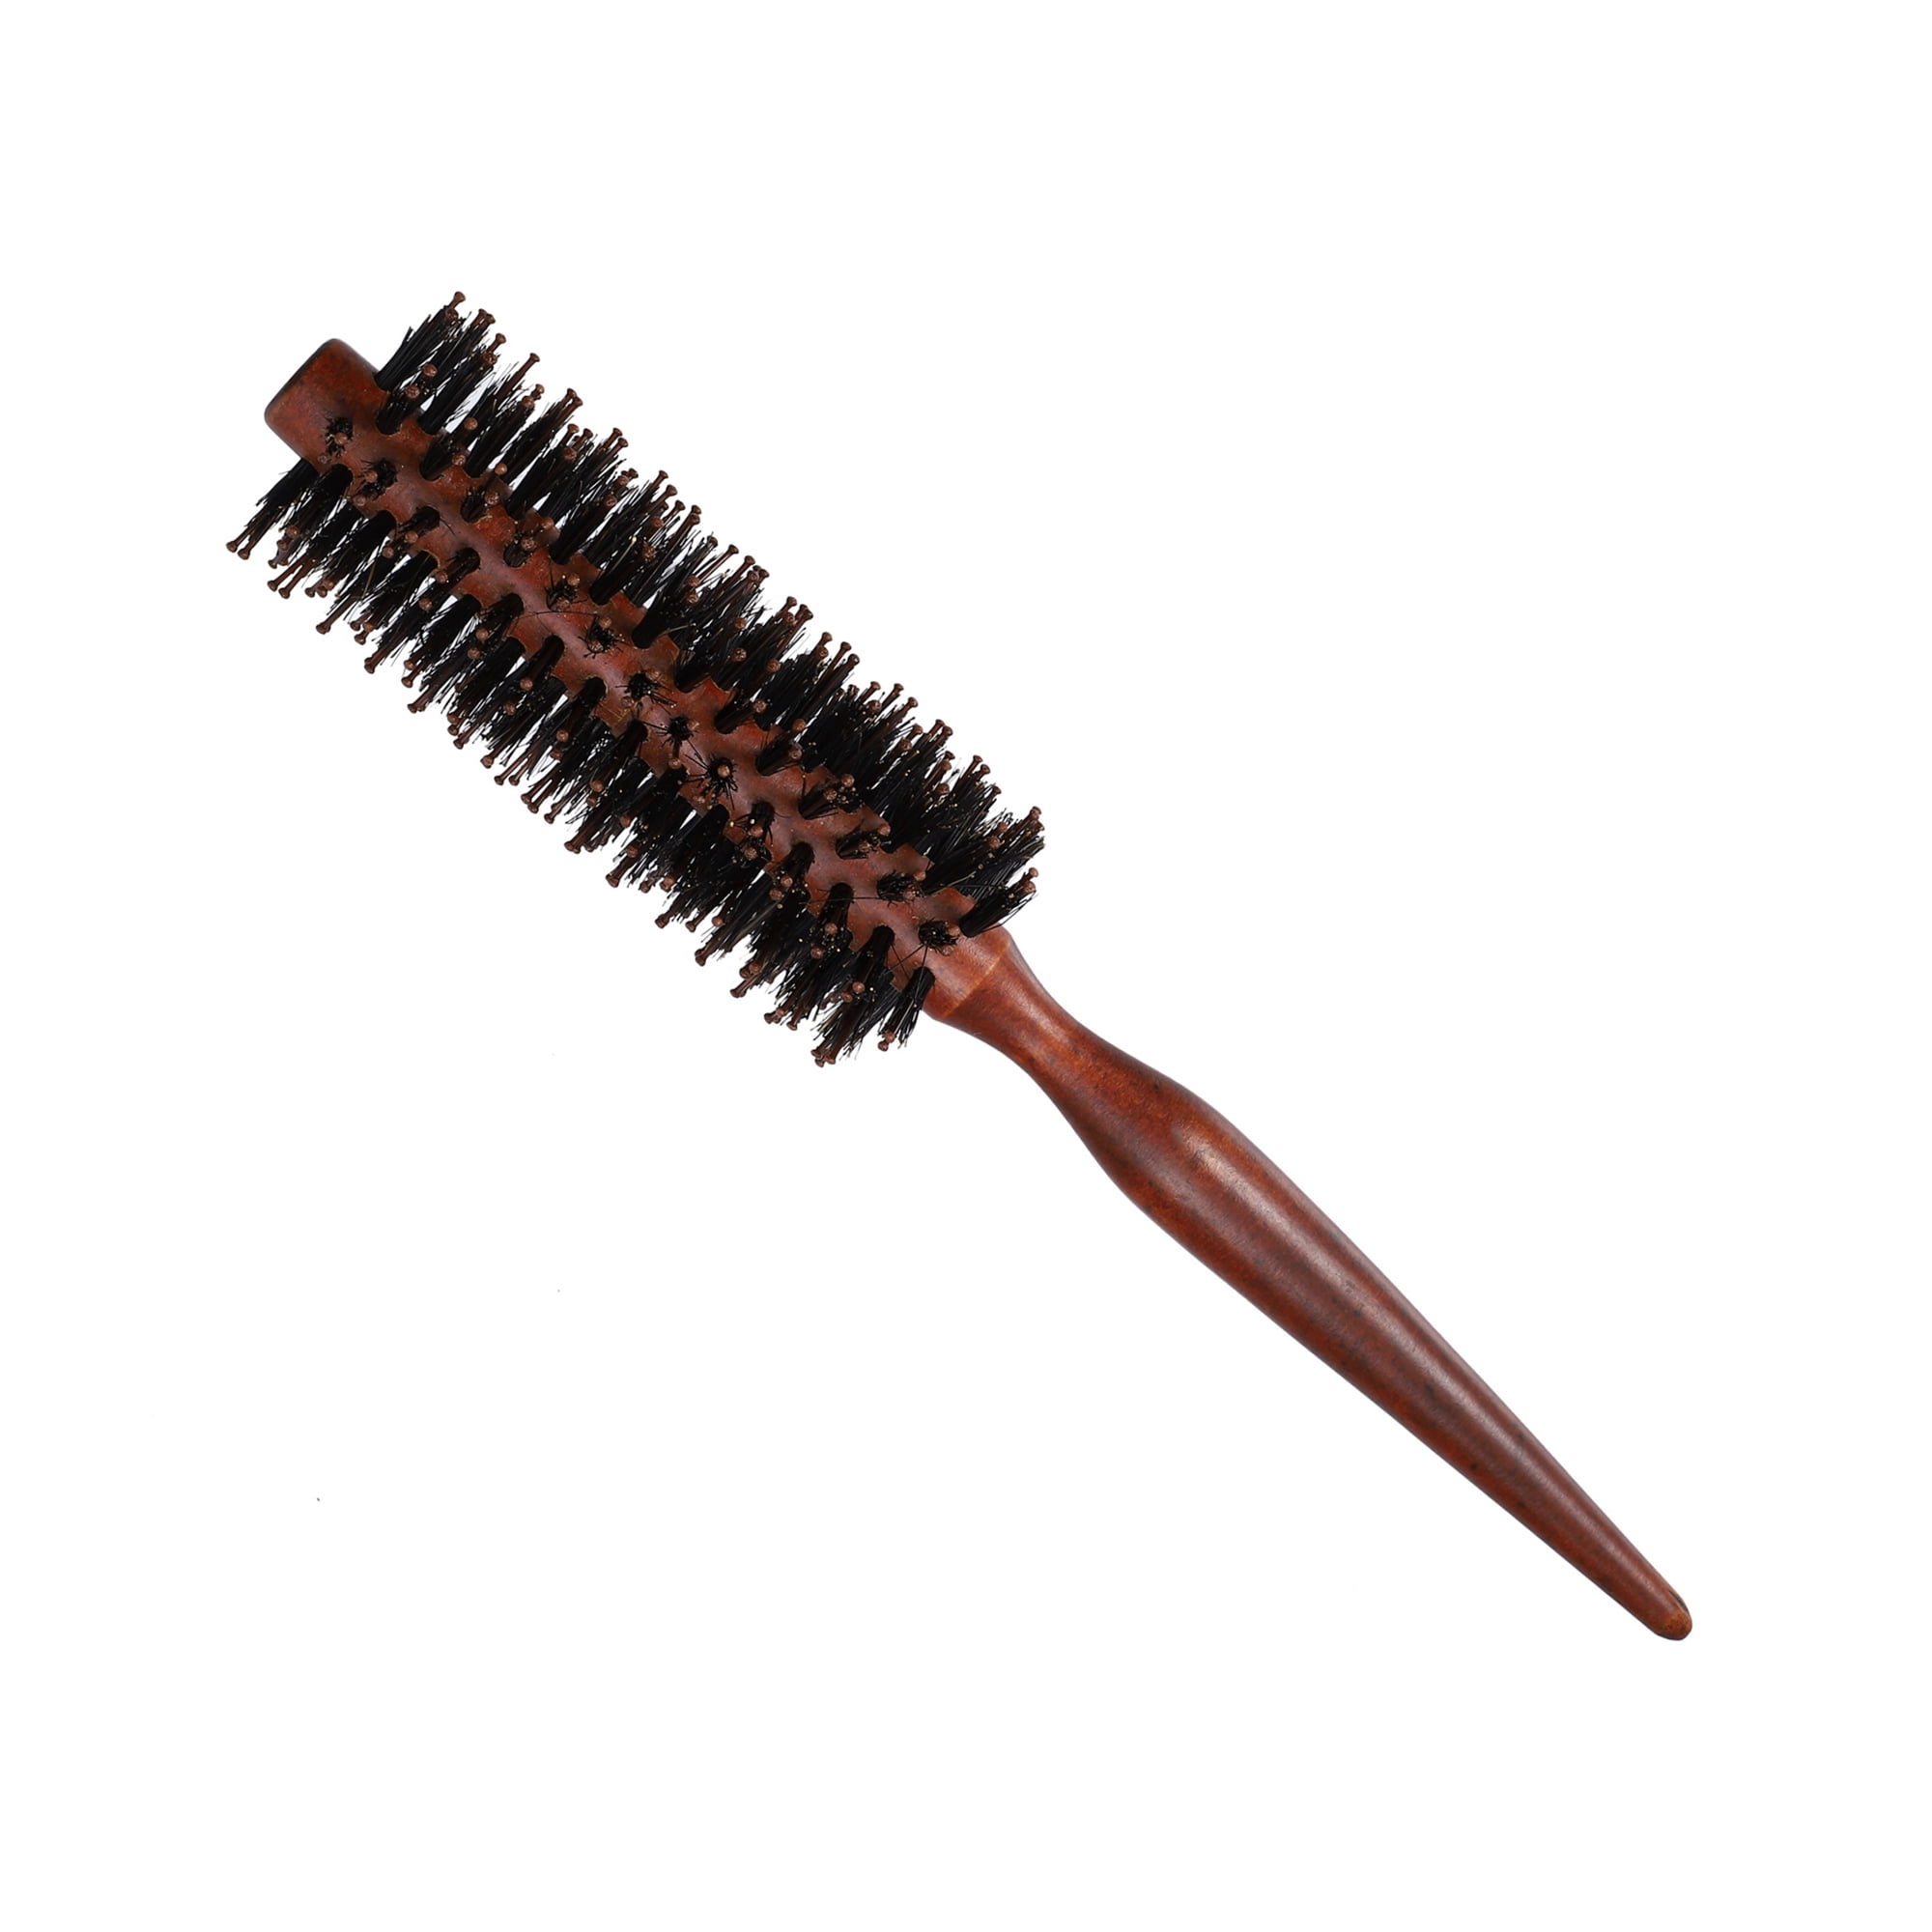 Unique Bargains Hair Brush Round Brush Hairstyle Wavy Styling Tool Brush 1.57 inch Wood Brown, Size: Small